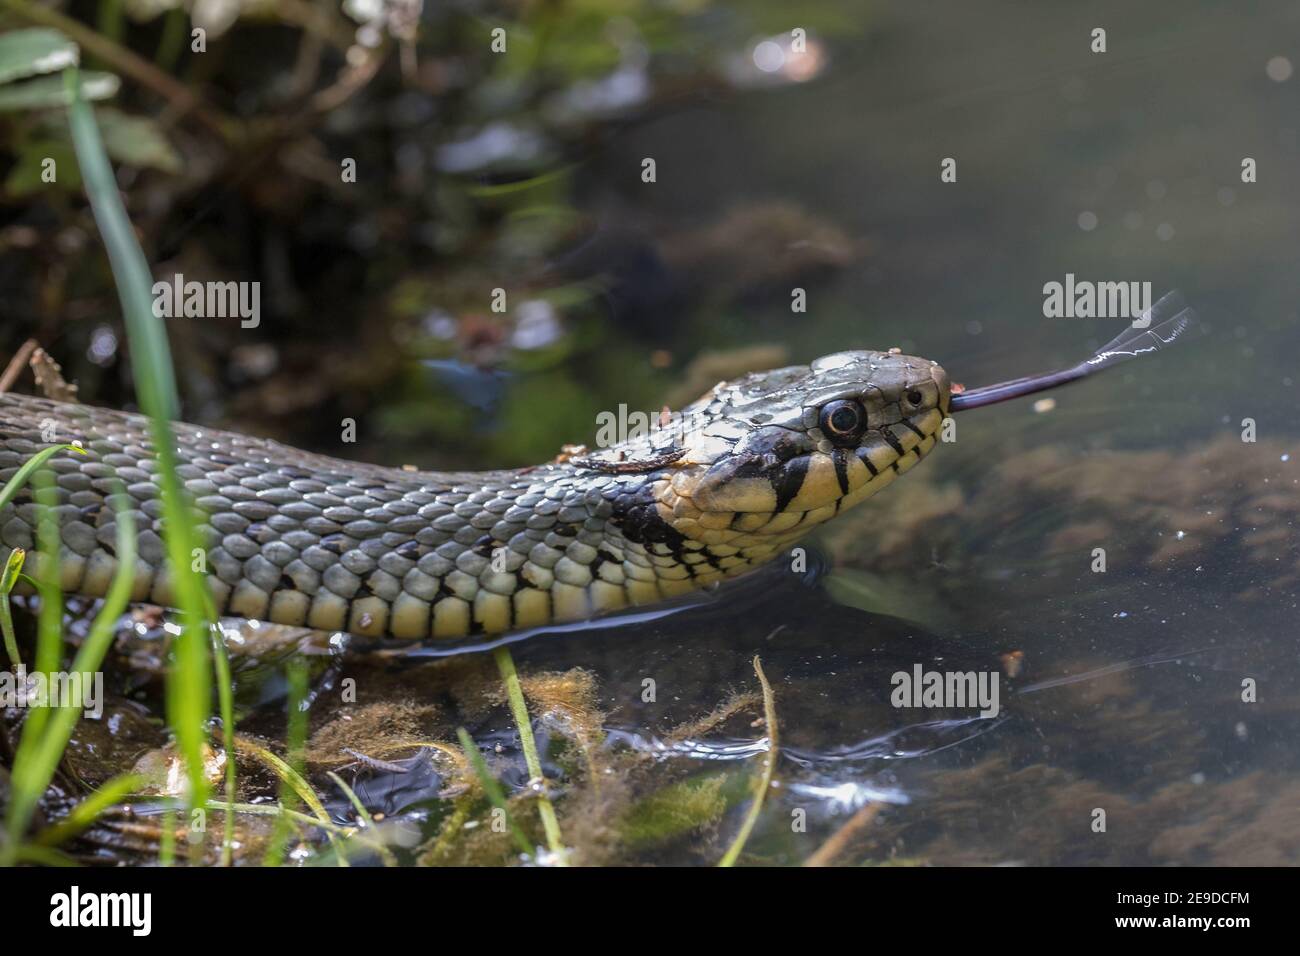 grass snake (Natrix natrix), slithers into the water darting its tongue in and out, portrait, Germany, Bavaria Stock Photo